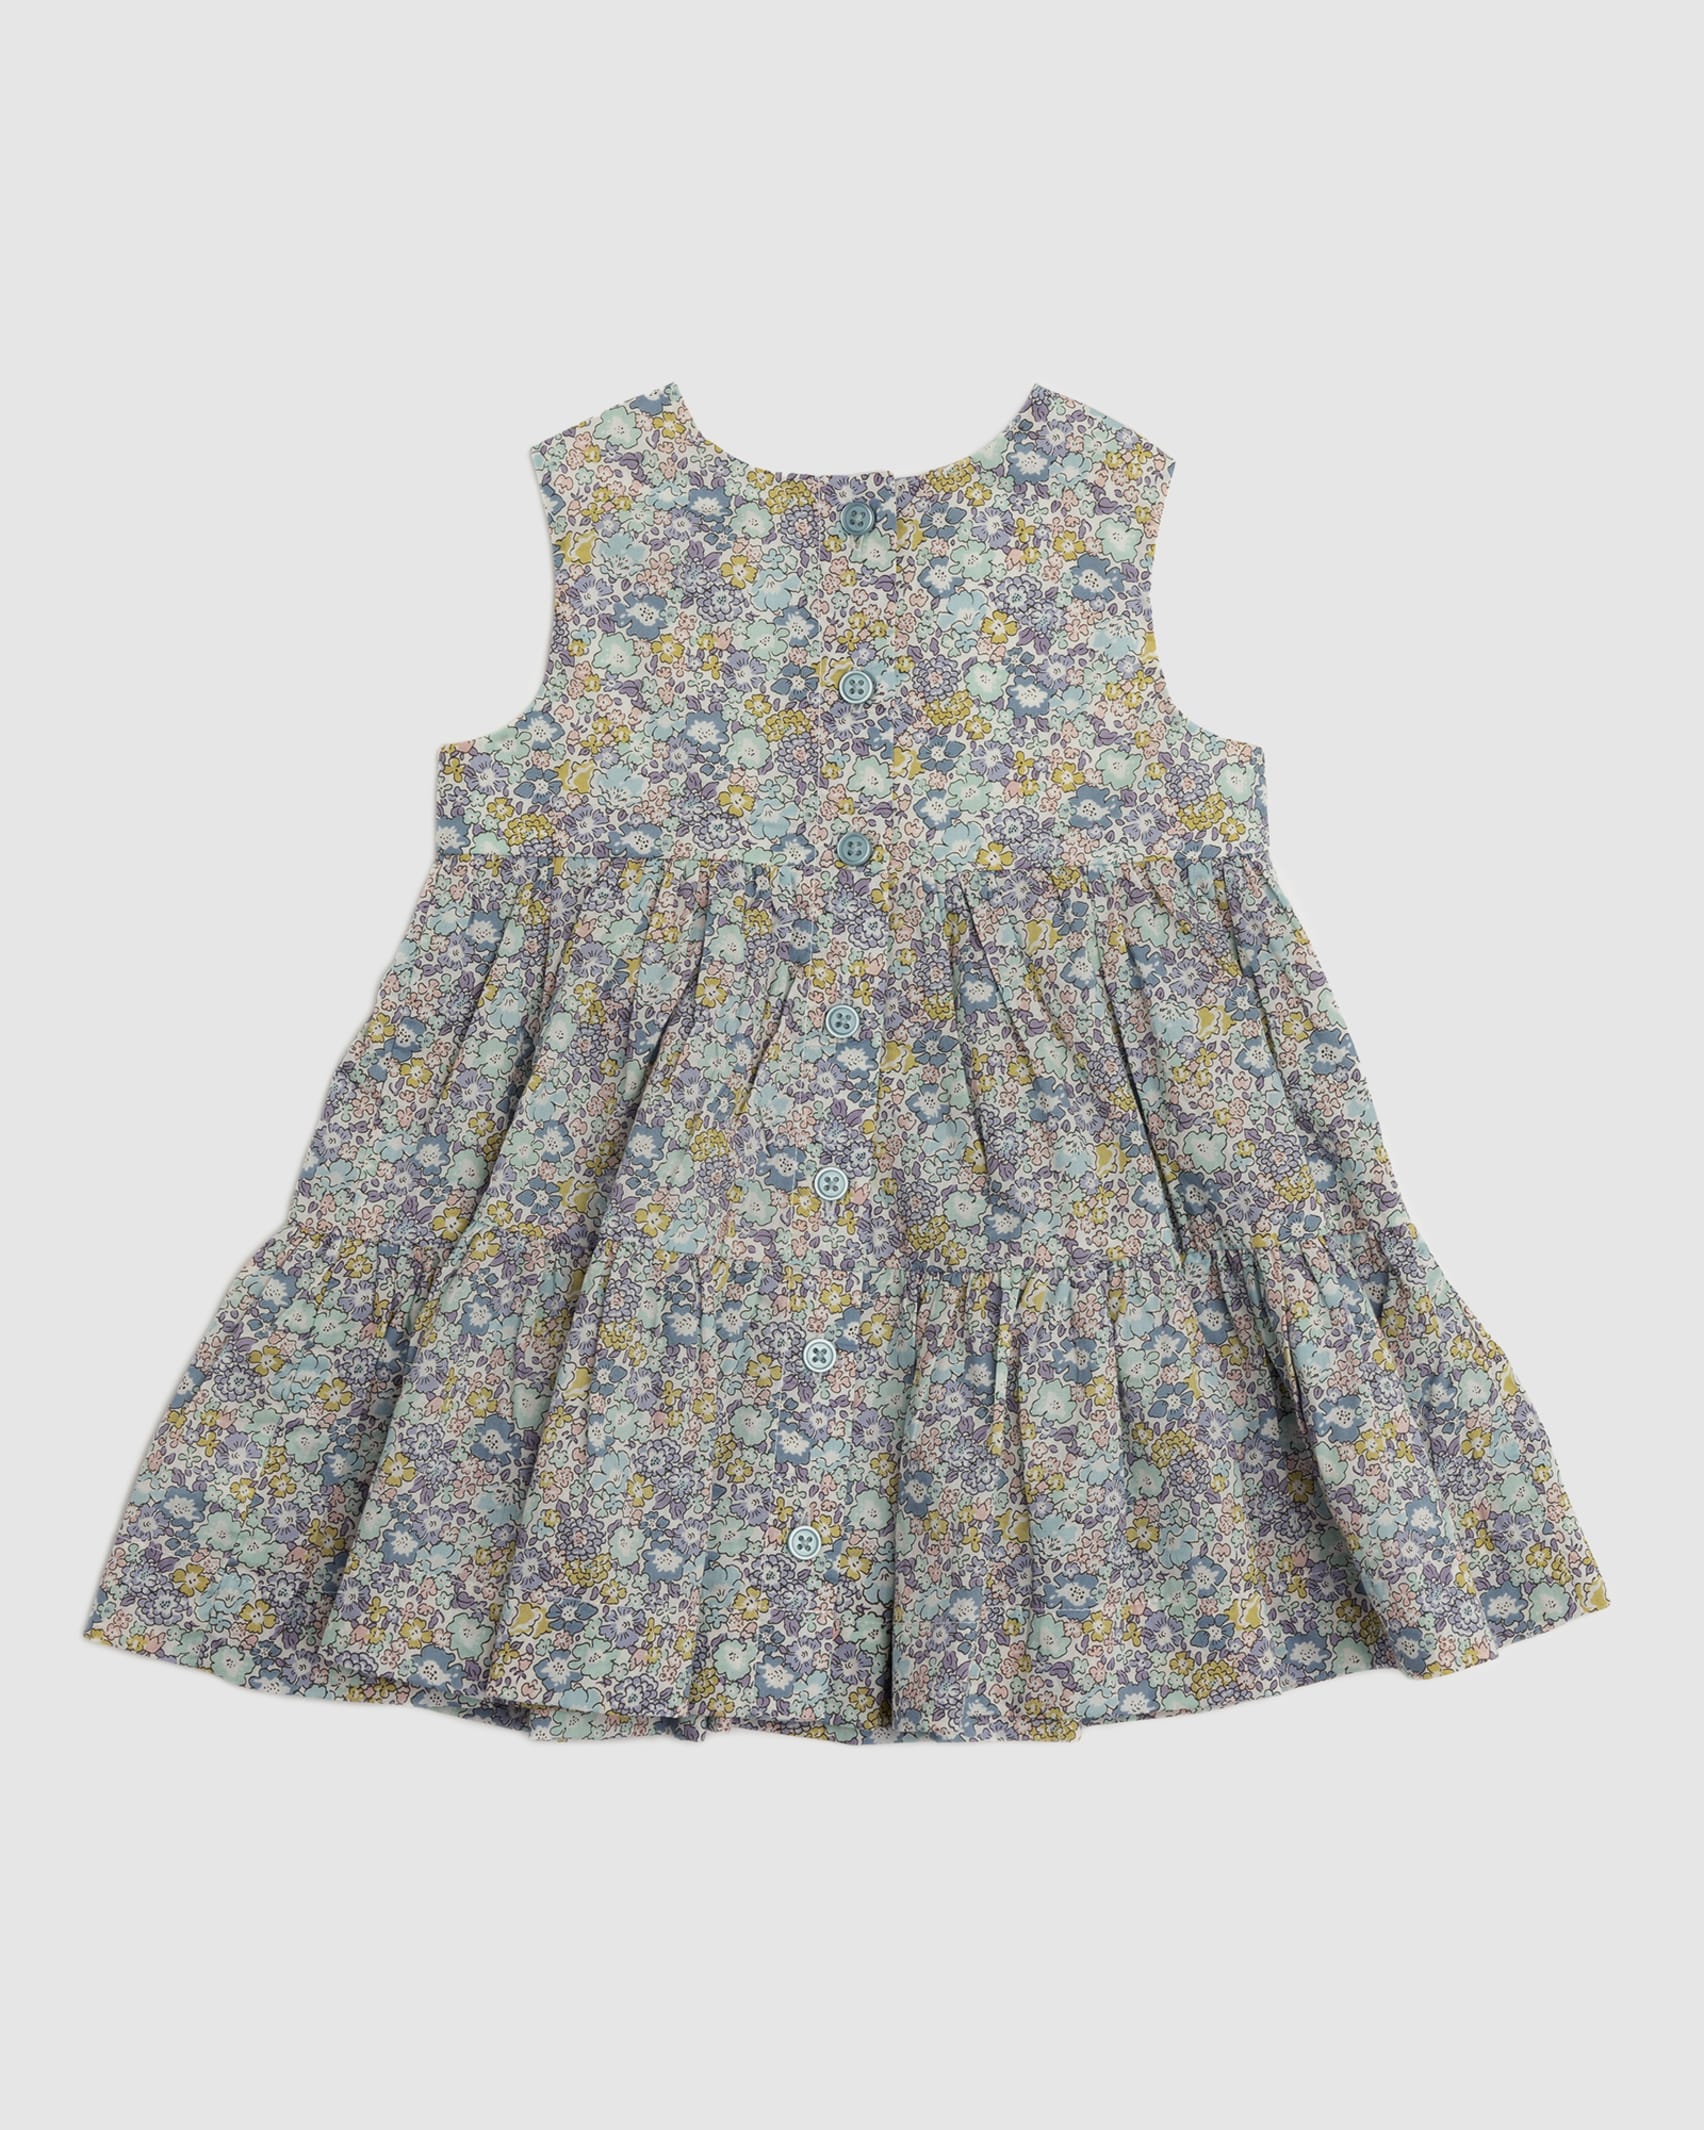 Mish Liberty Tiered Dress in BLUE MULTI